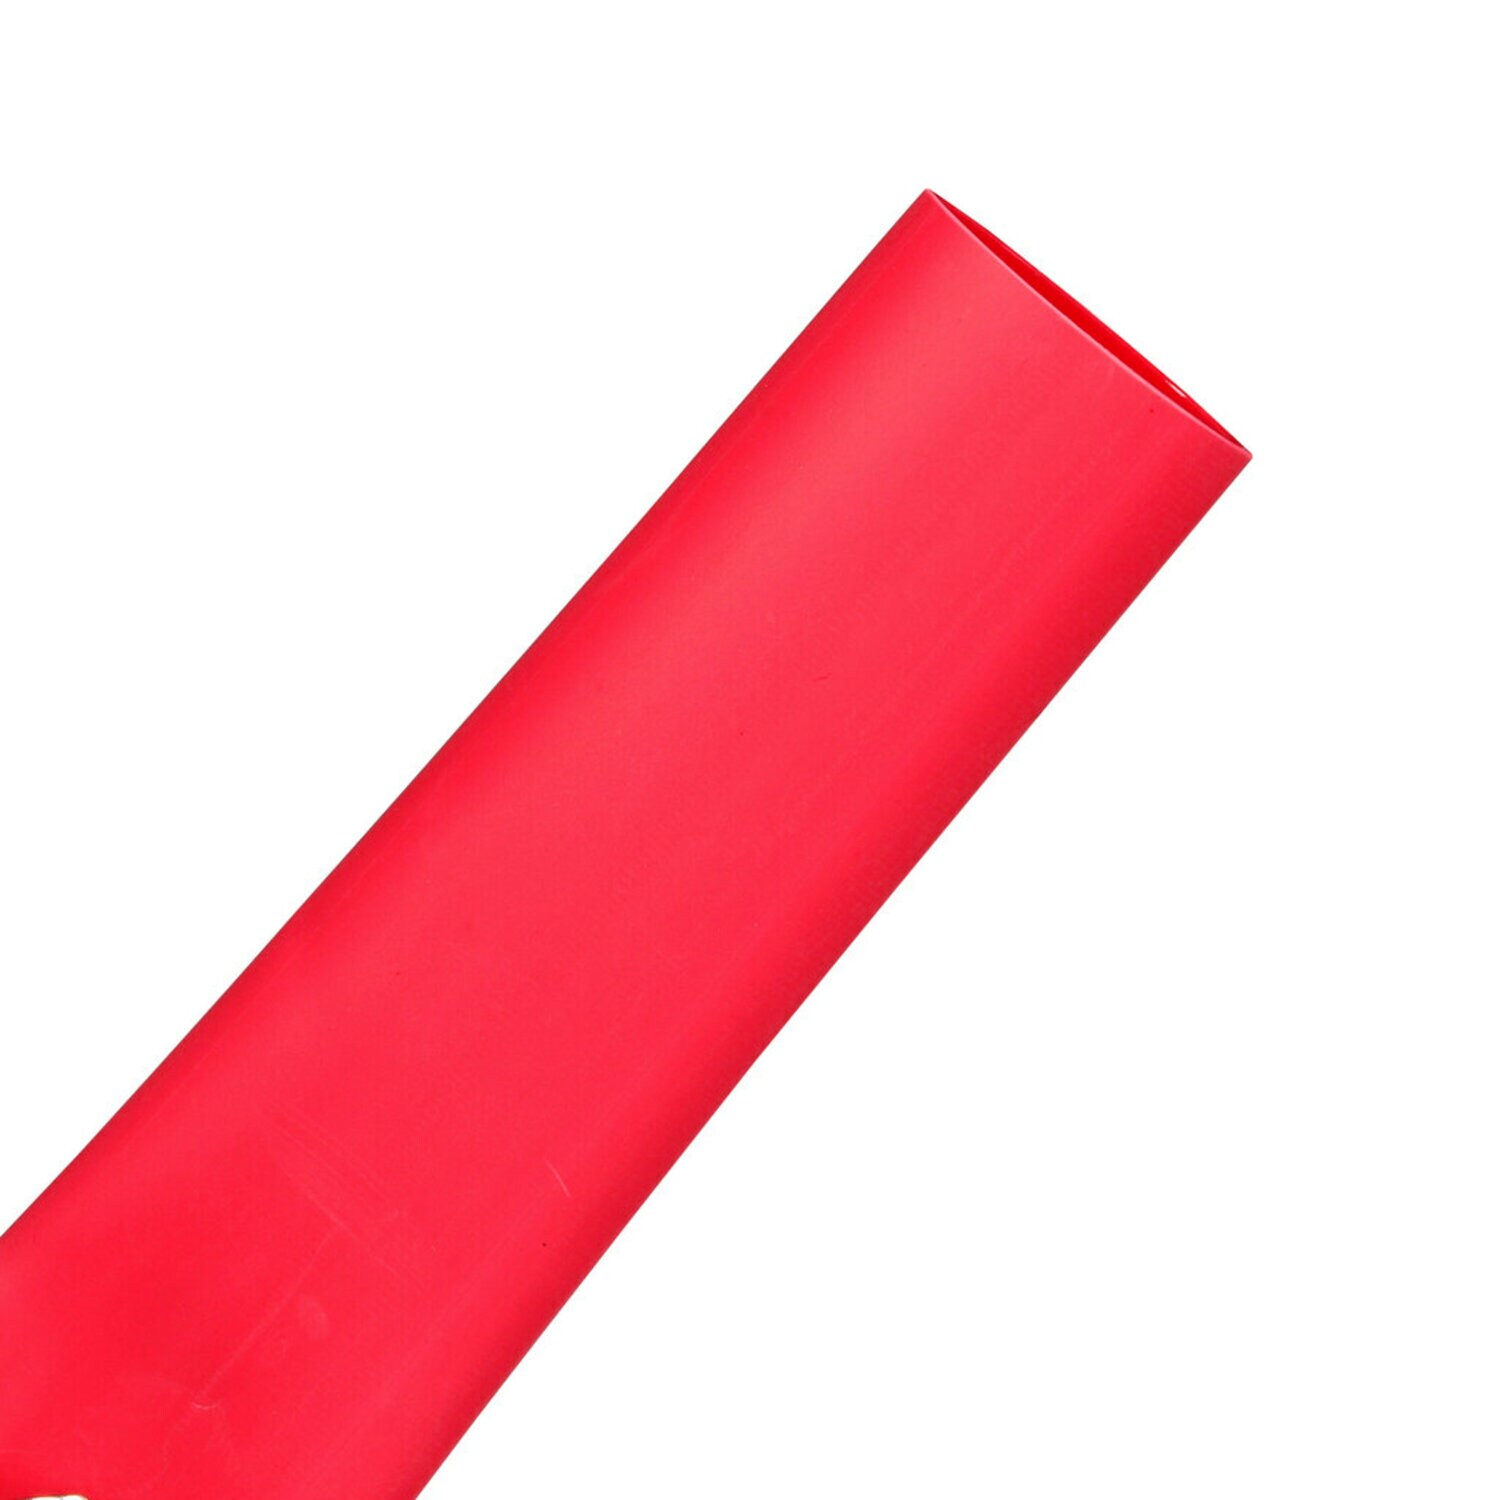 7010399052 - 3M Thin-Wall Heat Shrink Tubing EPS-300, Adhesive-Lined, 1-1/2" Red
48-in stick, 24/Case